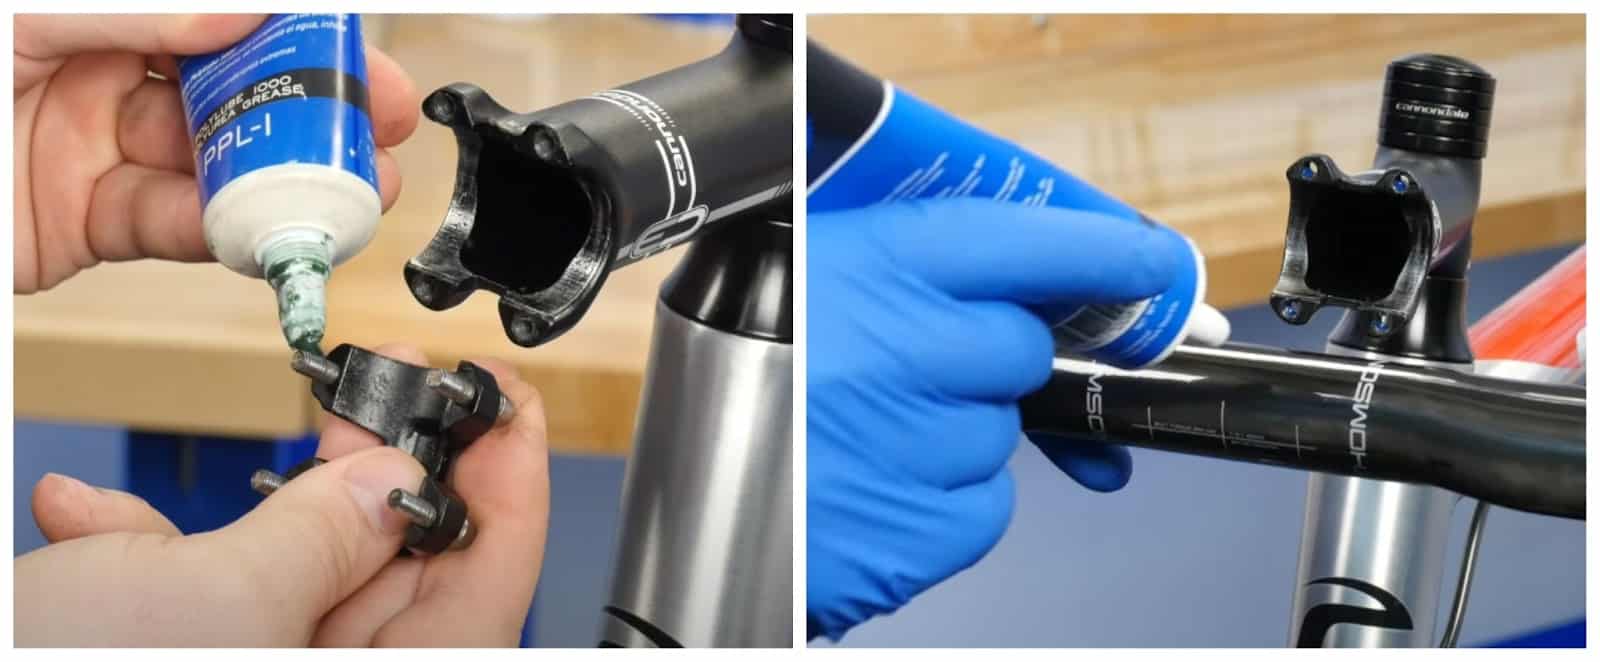 Lubricate the area of the drop bar that connects to the stem of your mountain bike.